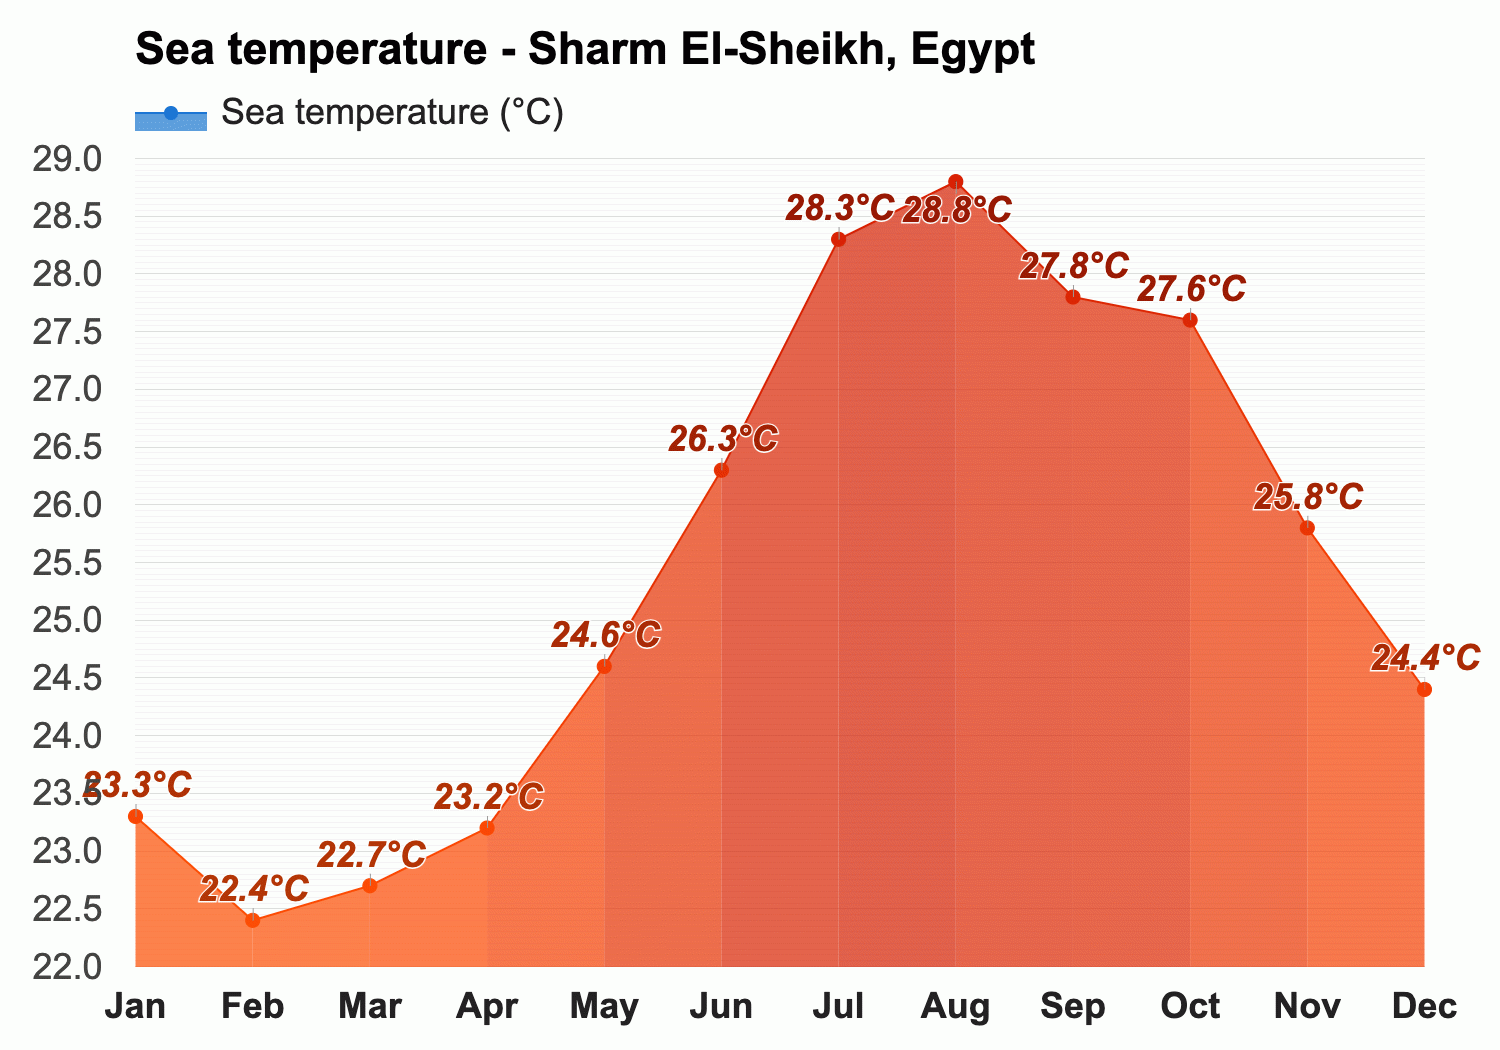 Sharm El-Sheikh, Egypt - Climate & Monthly weather forecast